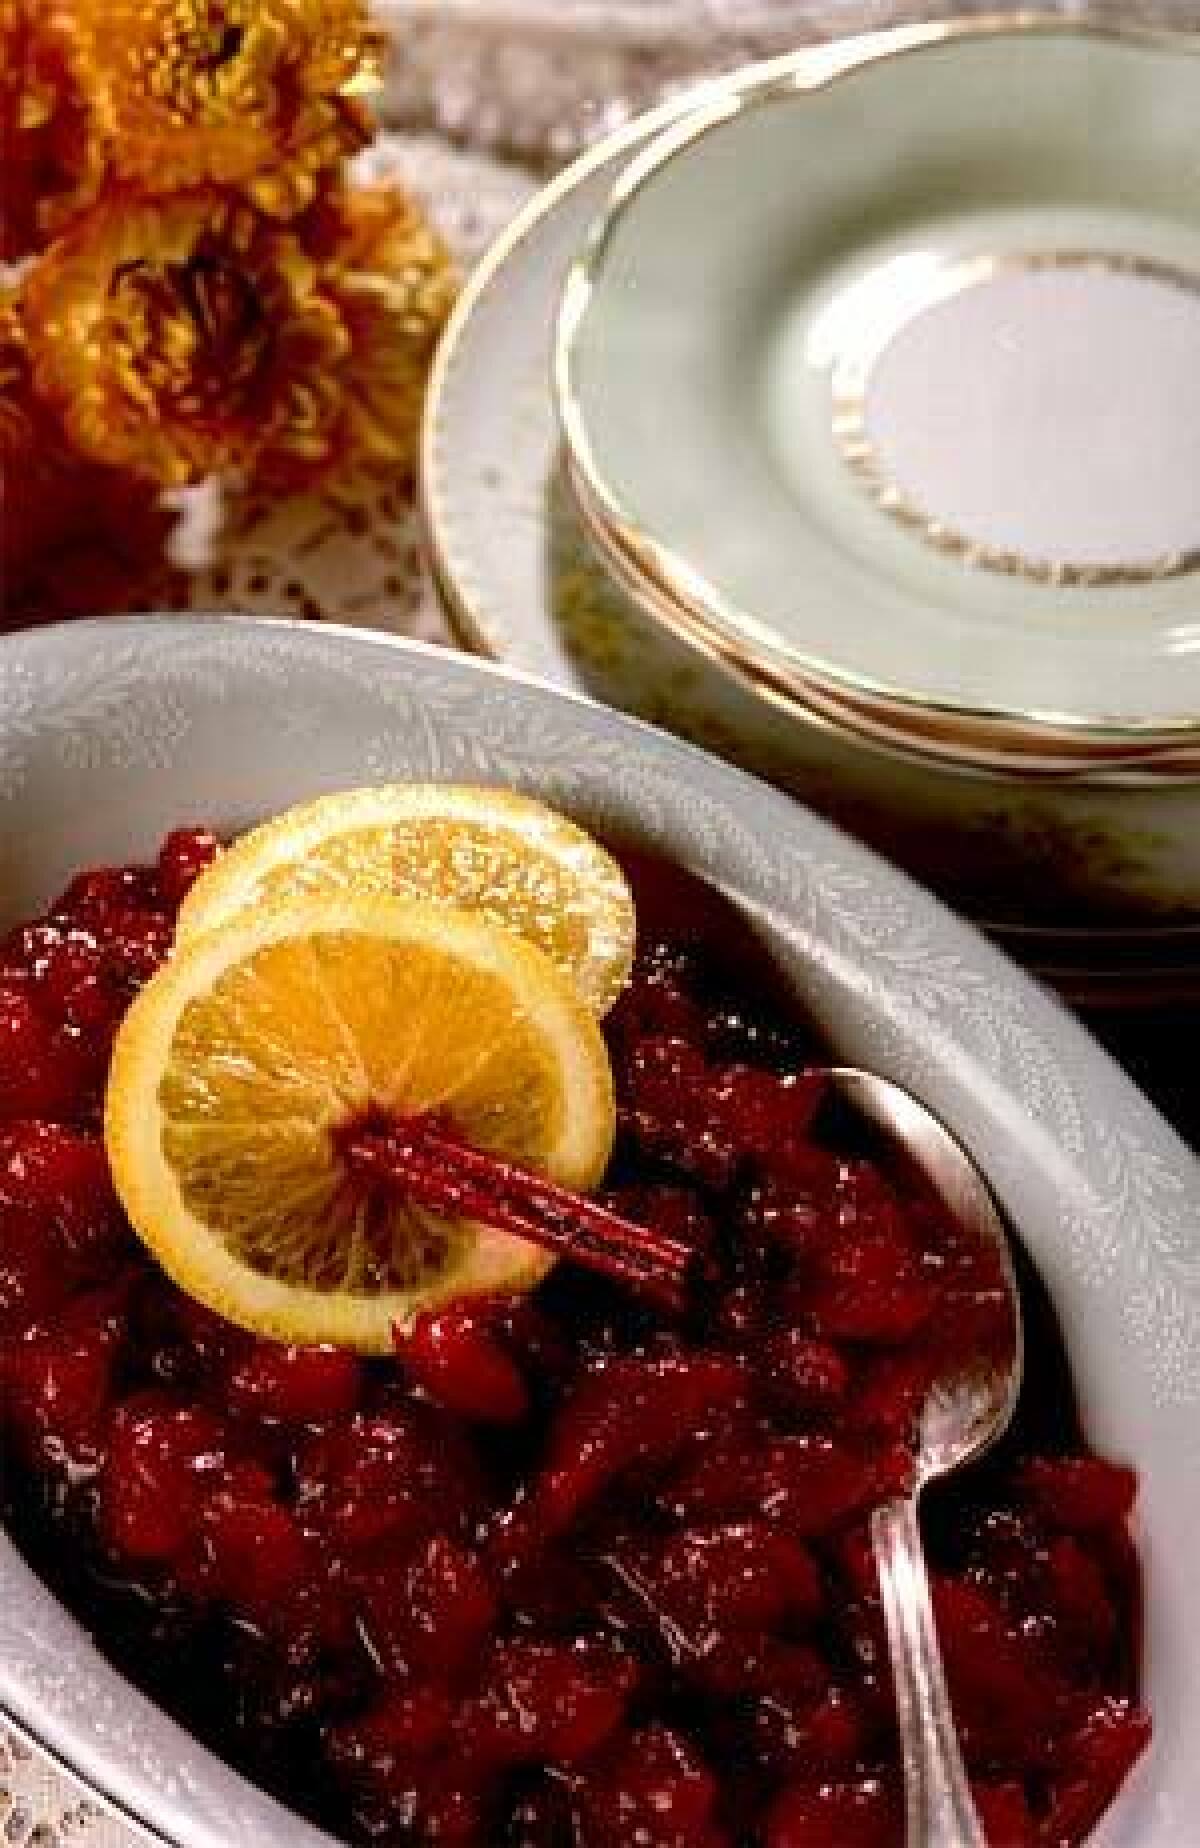 CRANBERRIES: A must-have at the Thanksgiving table.